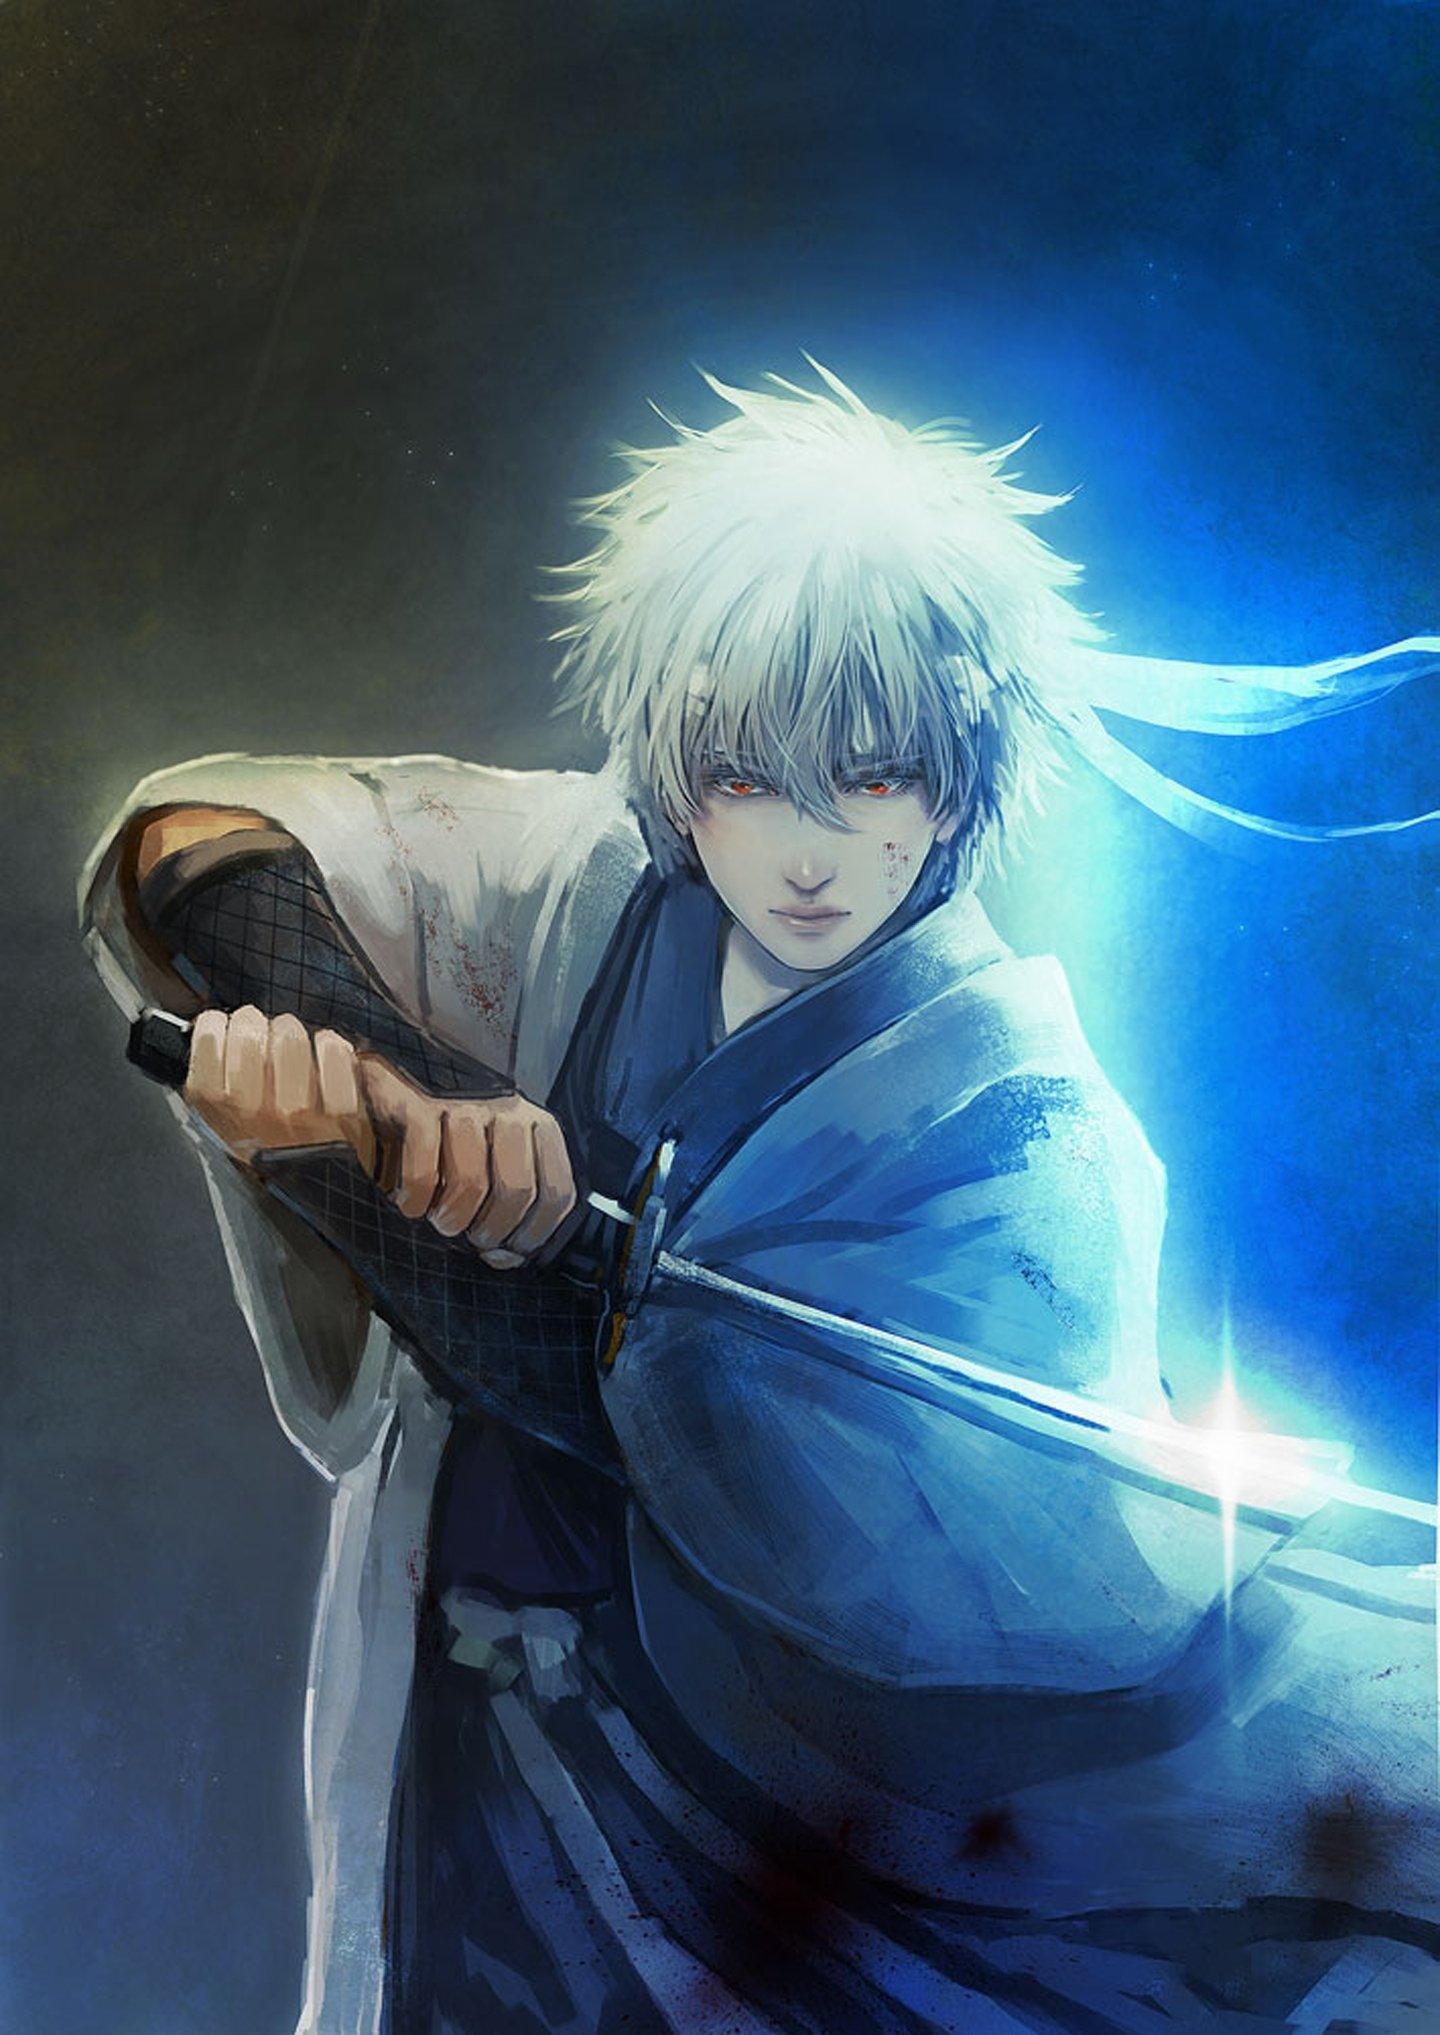 Gintama (TV Series): Gintoki's physical strength, Able to break Oboro's sword by biting it with his teeth. 1440x2040 HD Background.